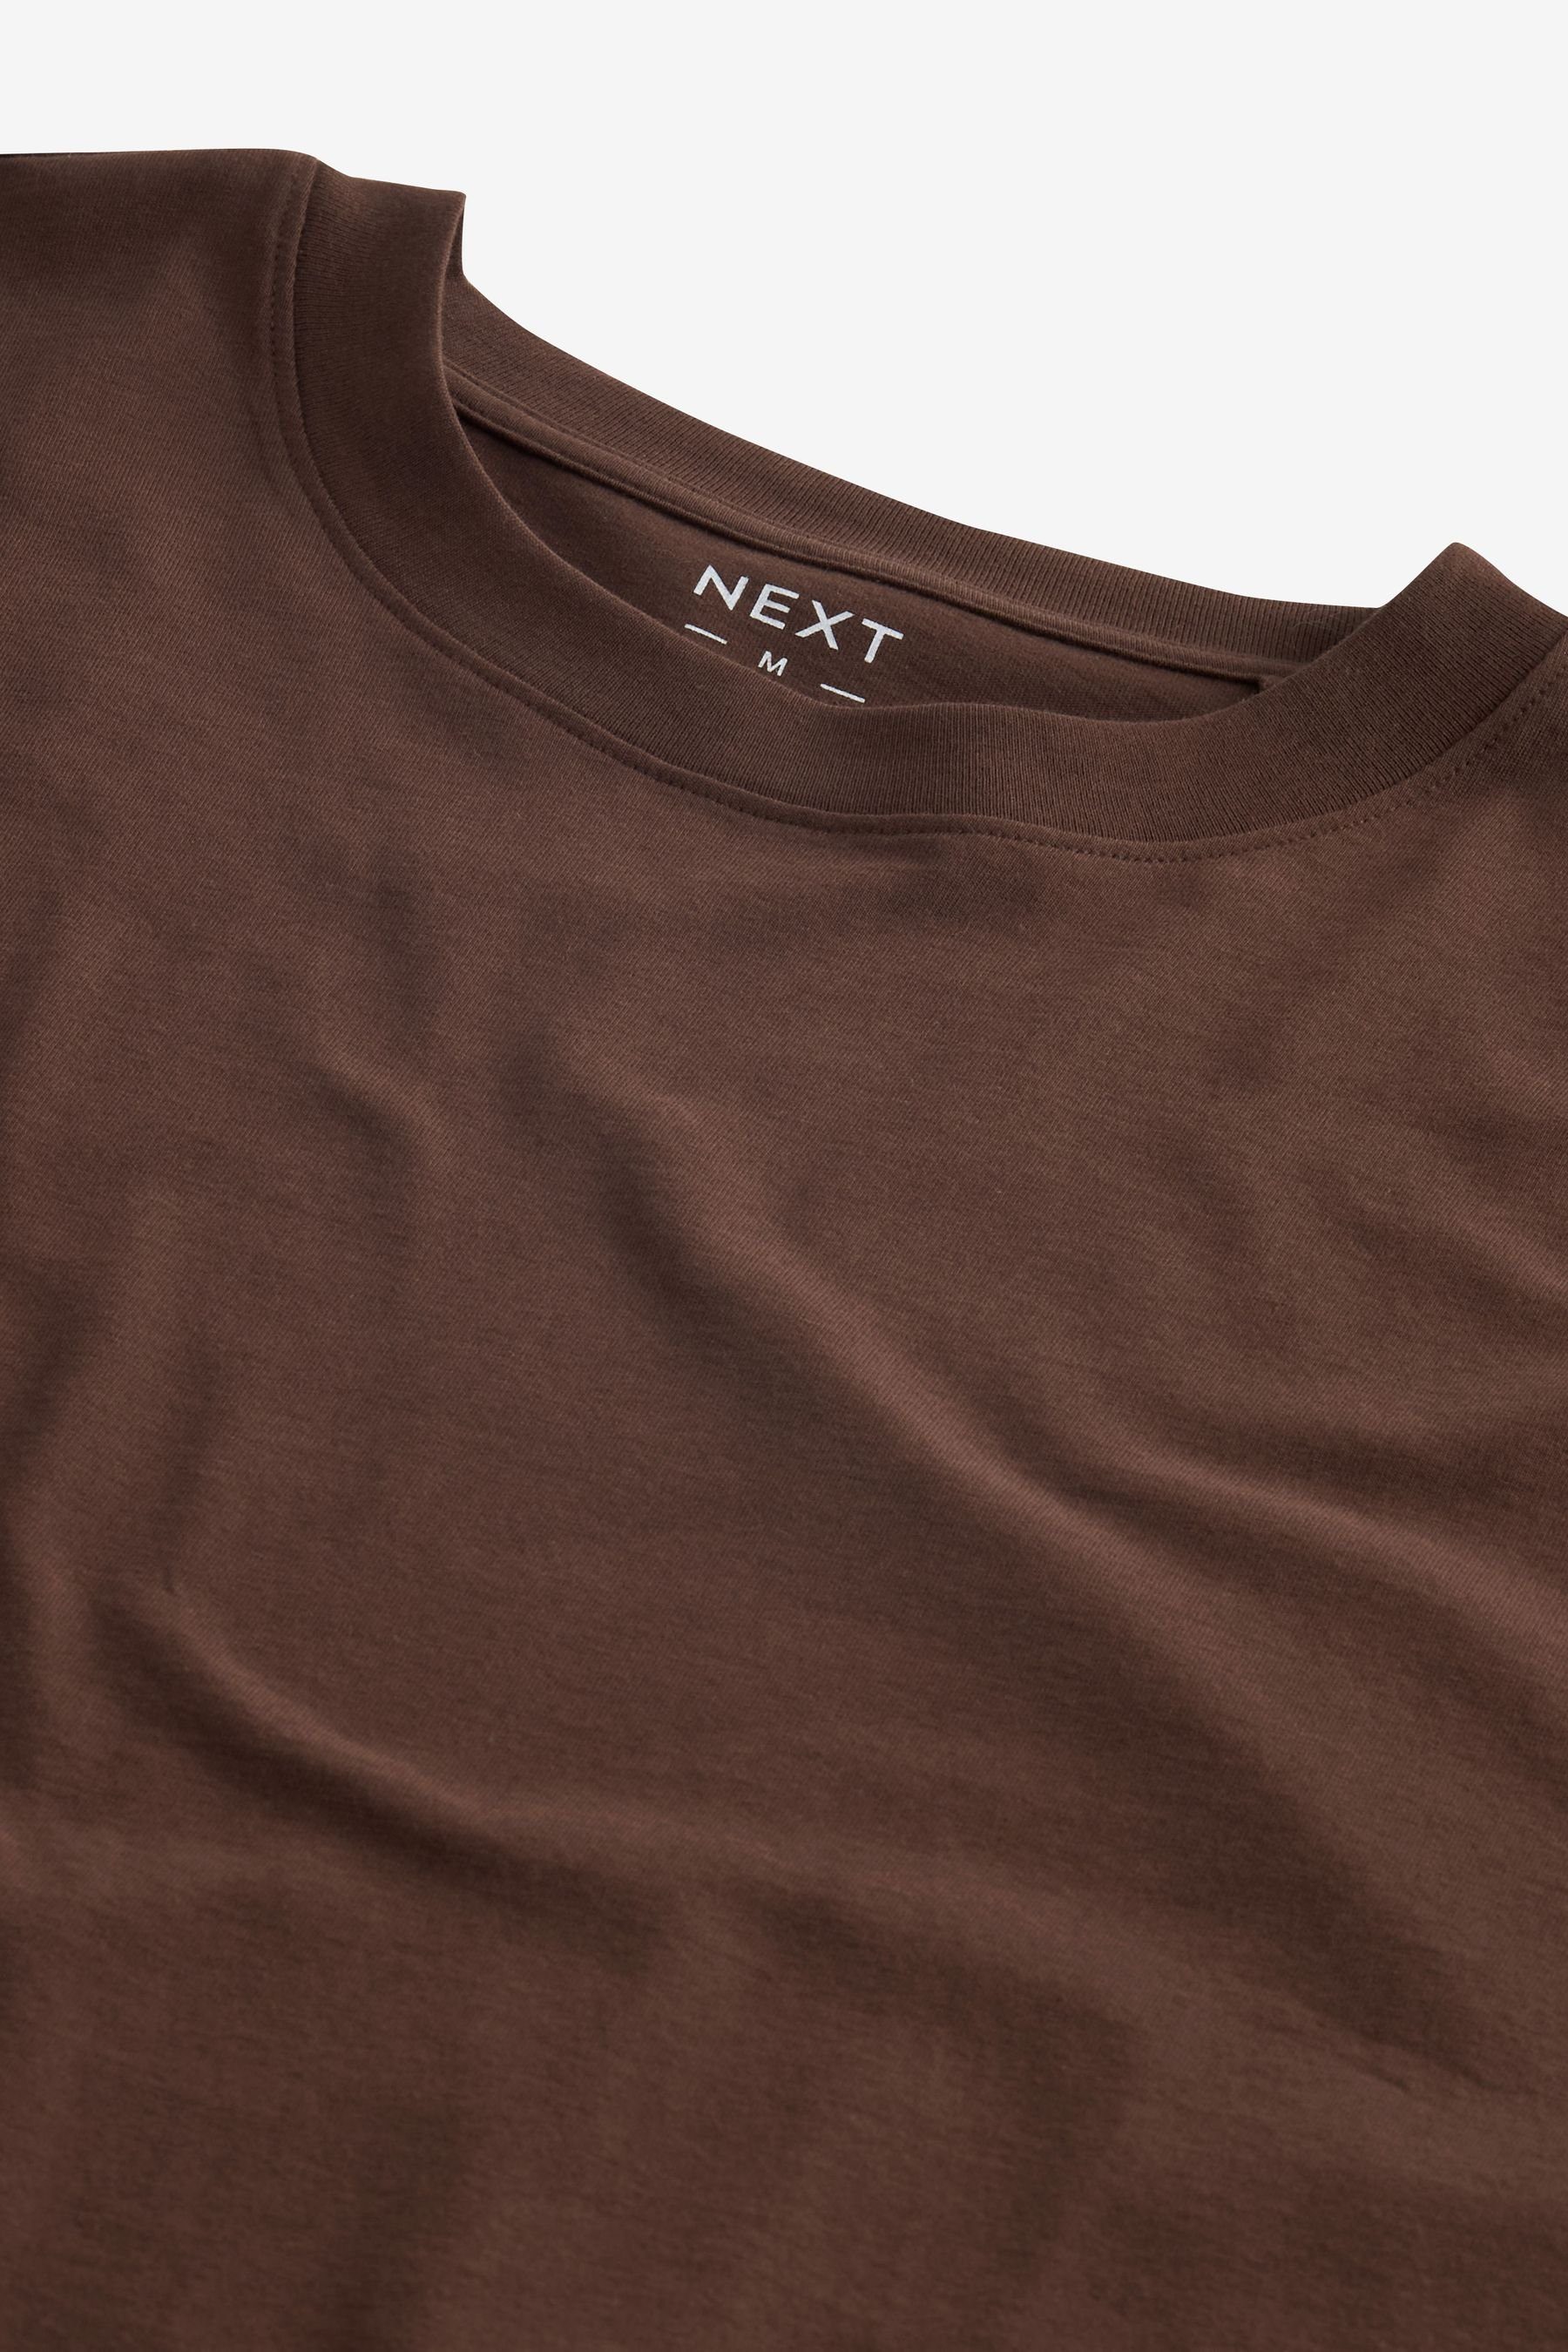 Next T-Shirt im Chocolate Rundhals-T-Shirt Brown Relaxed Fit (1-tlg)